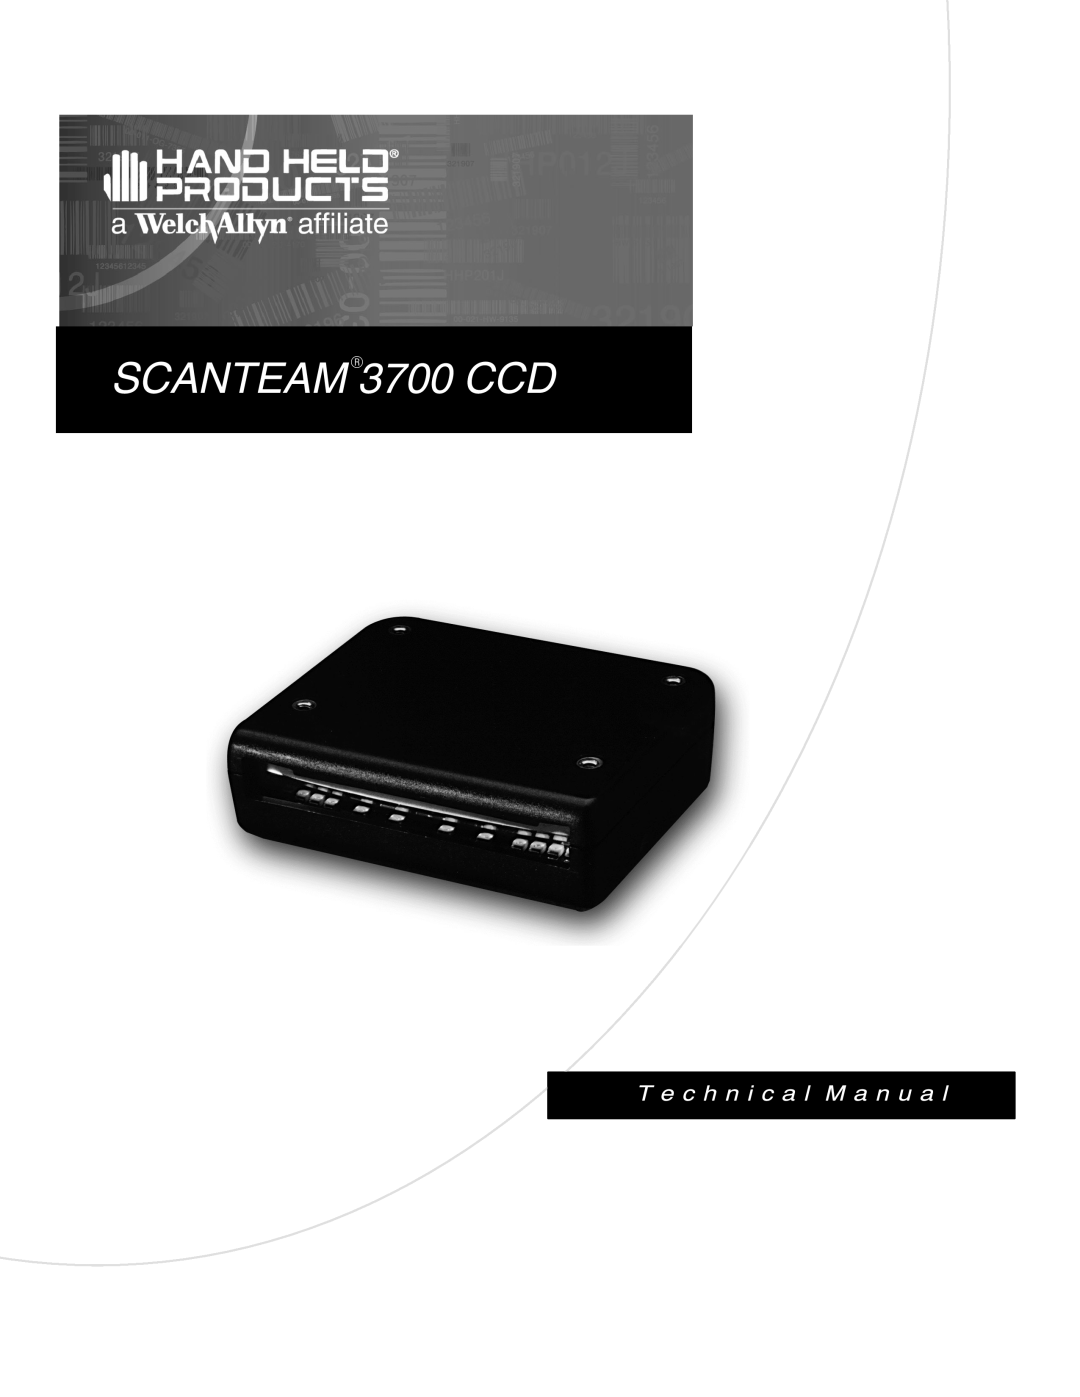 Hand Held Products manual SCANTEAMR3700 CCD 